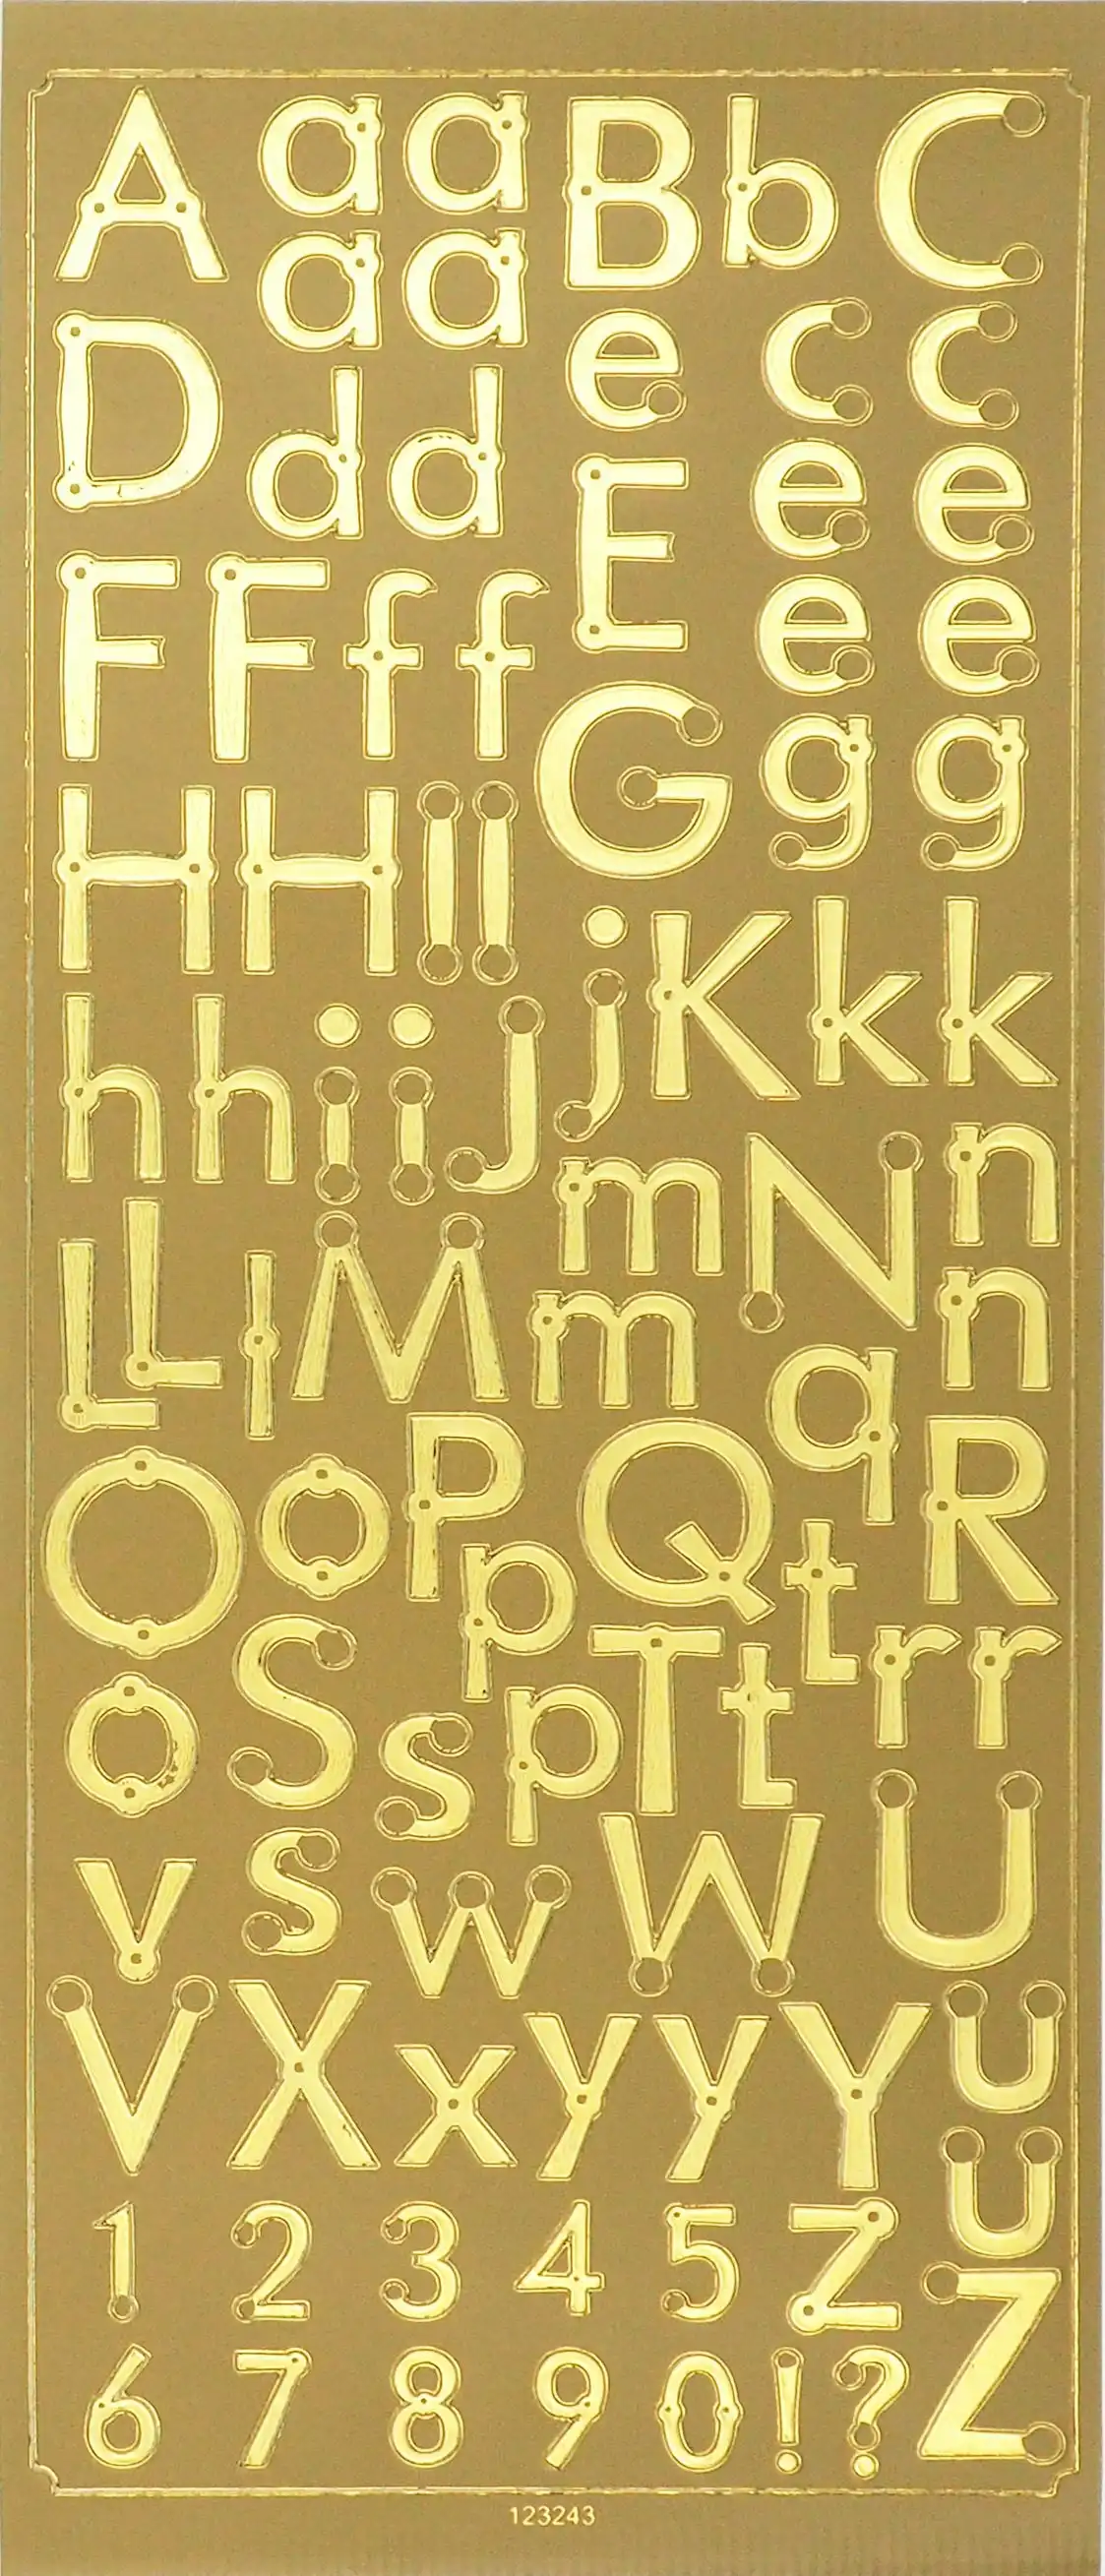 Arbee Foil Stickers Alpha Lower Case, Gold